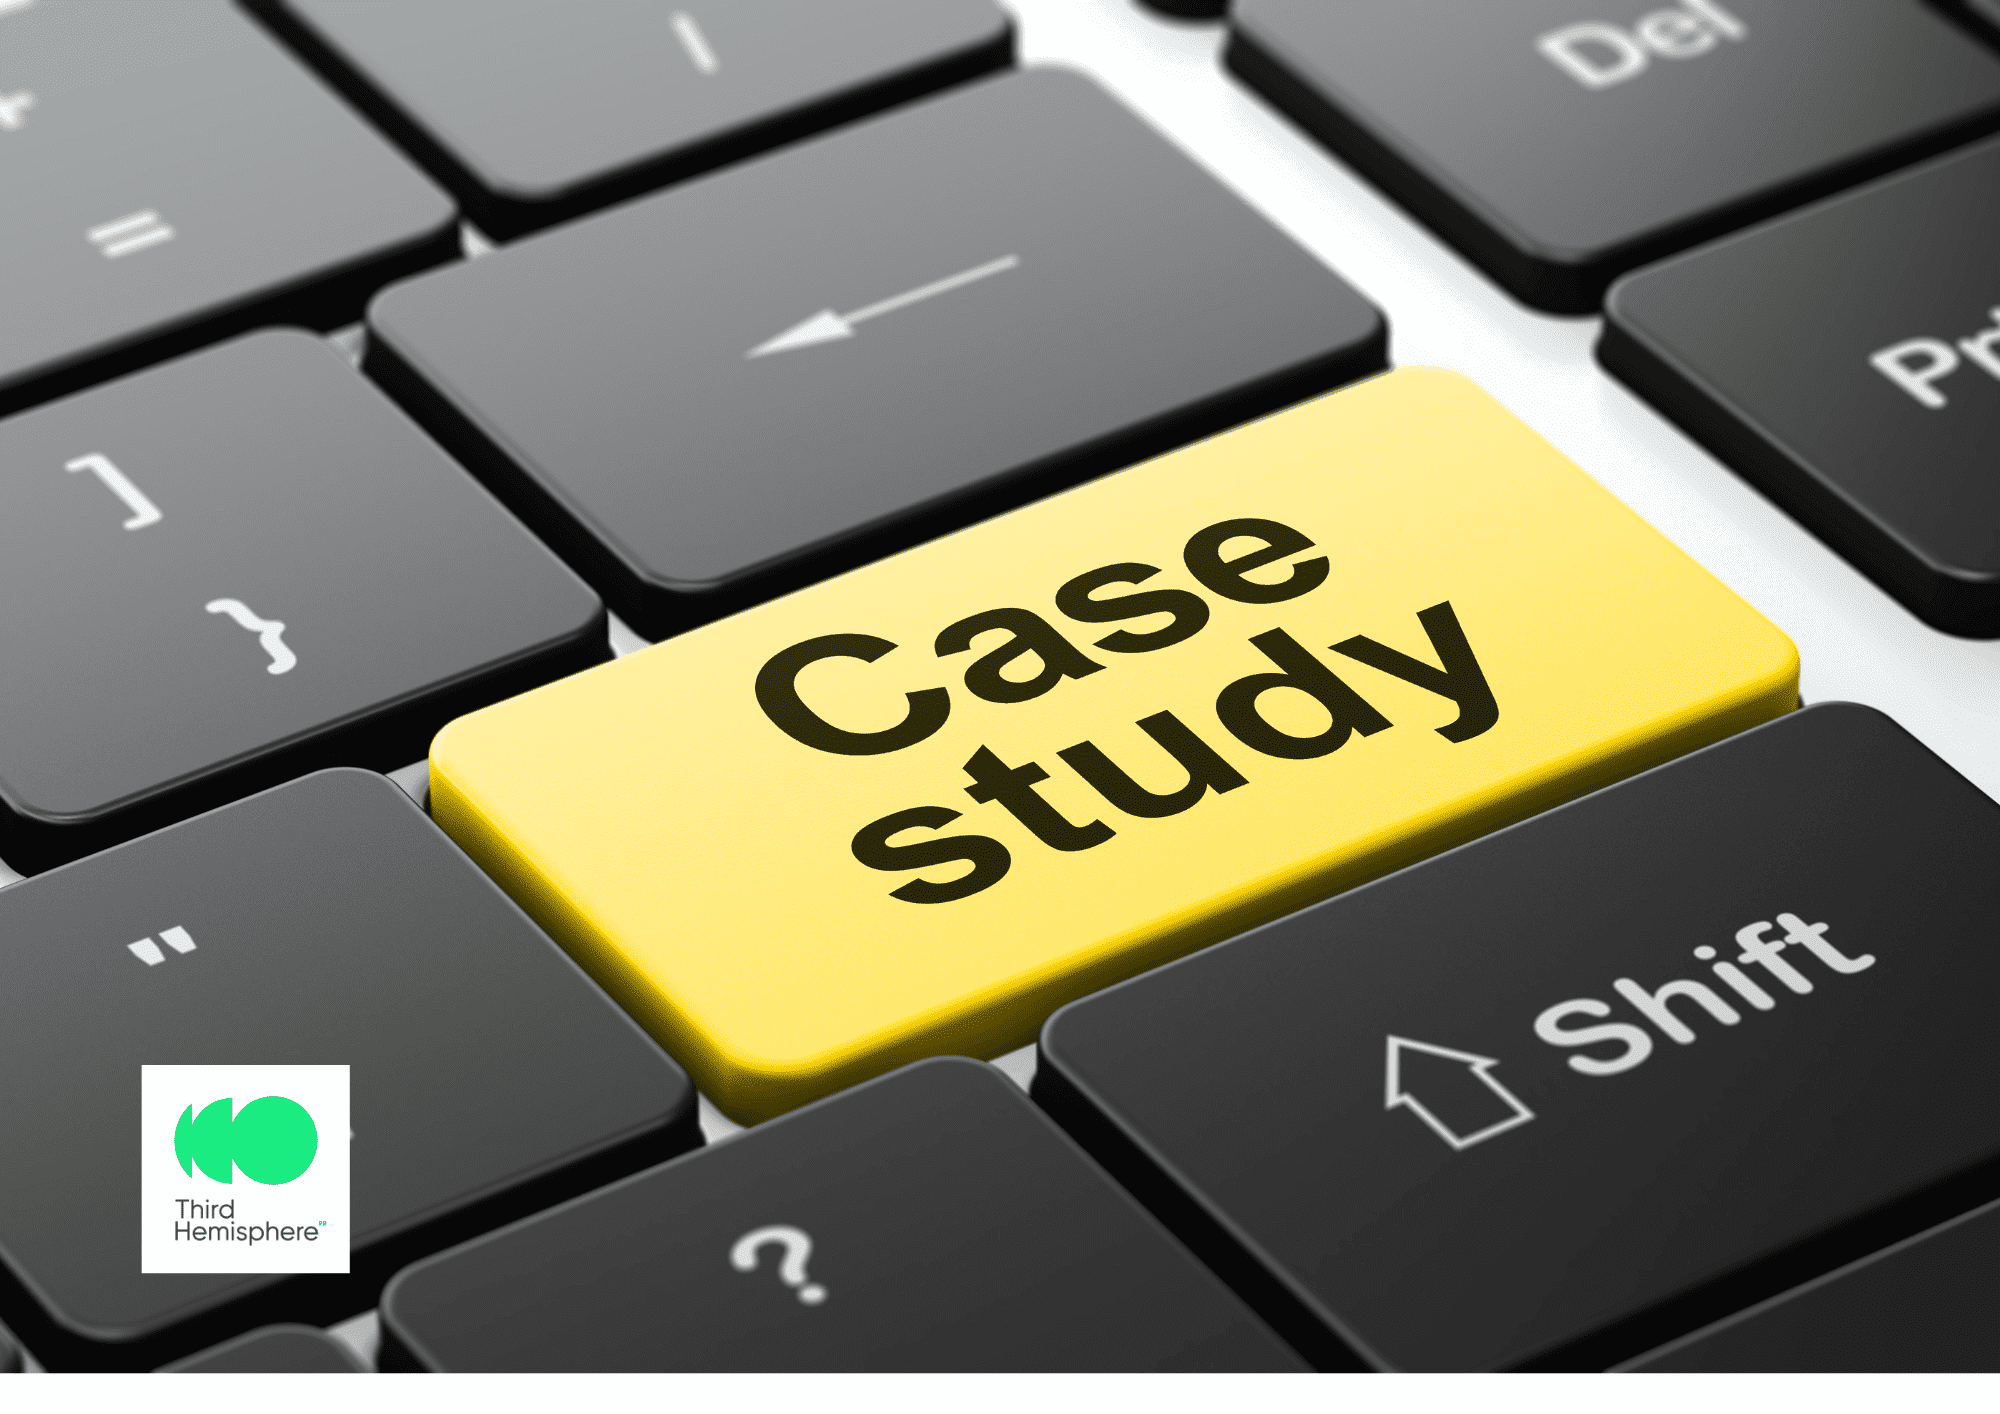 Discover the power of case study marketing for your business. Learn how showcasing success stories can elevate your PR and marketing efforts, driving engagement and growth.